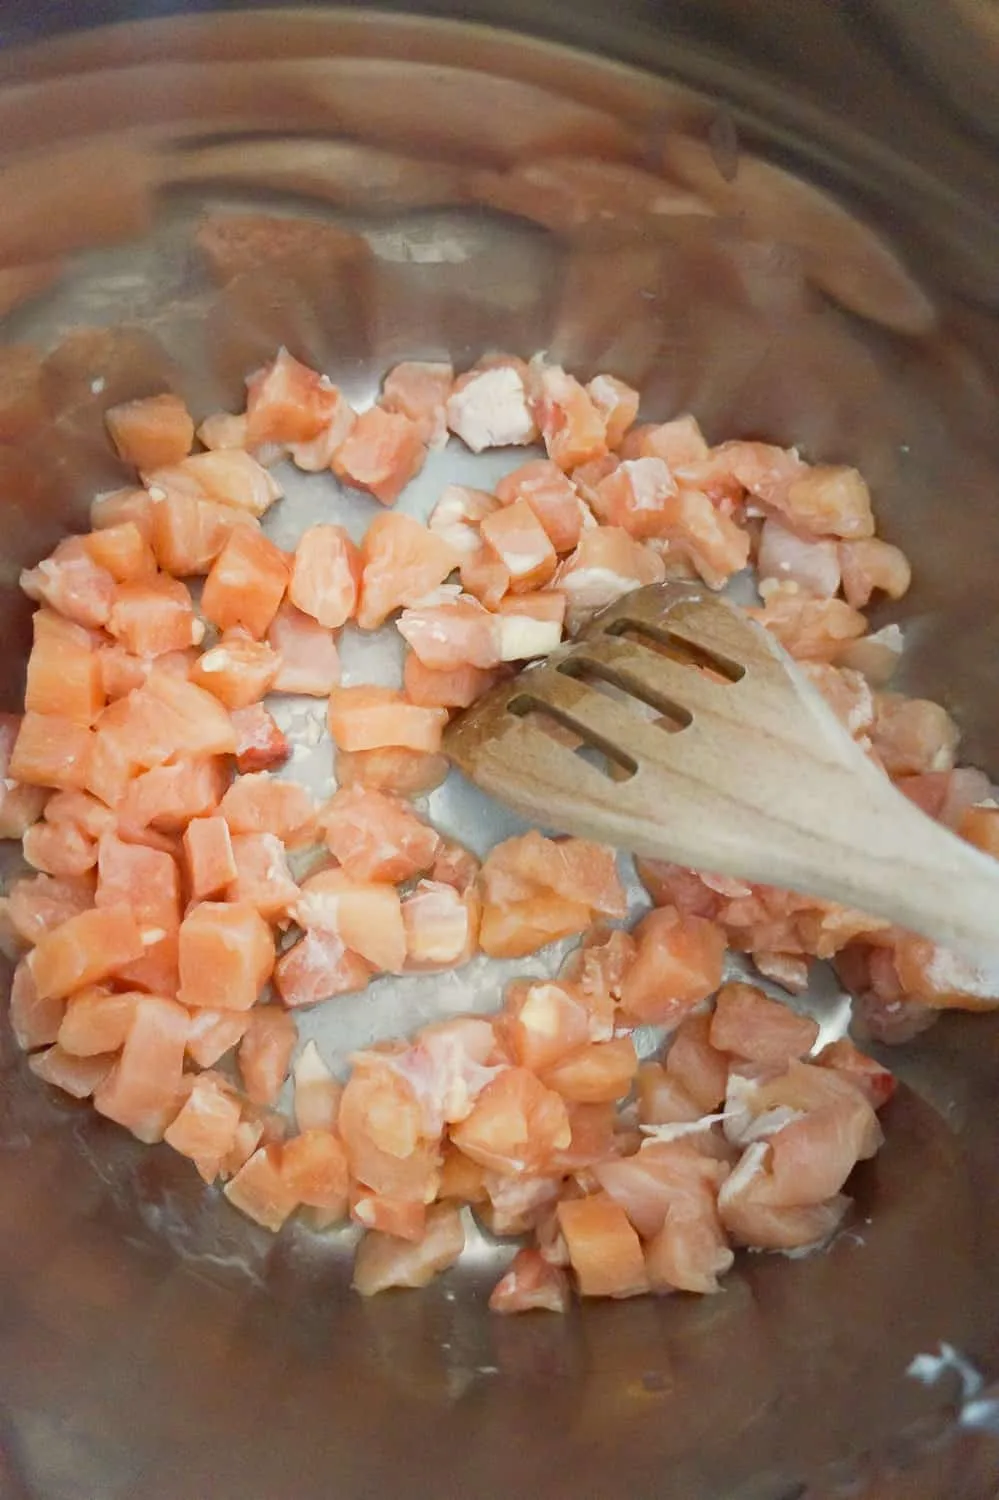 small chunks of raw chicken breast in an Instant Pot